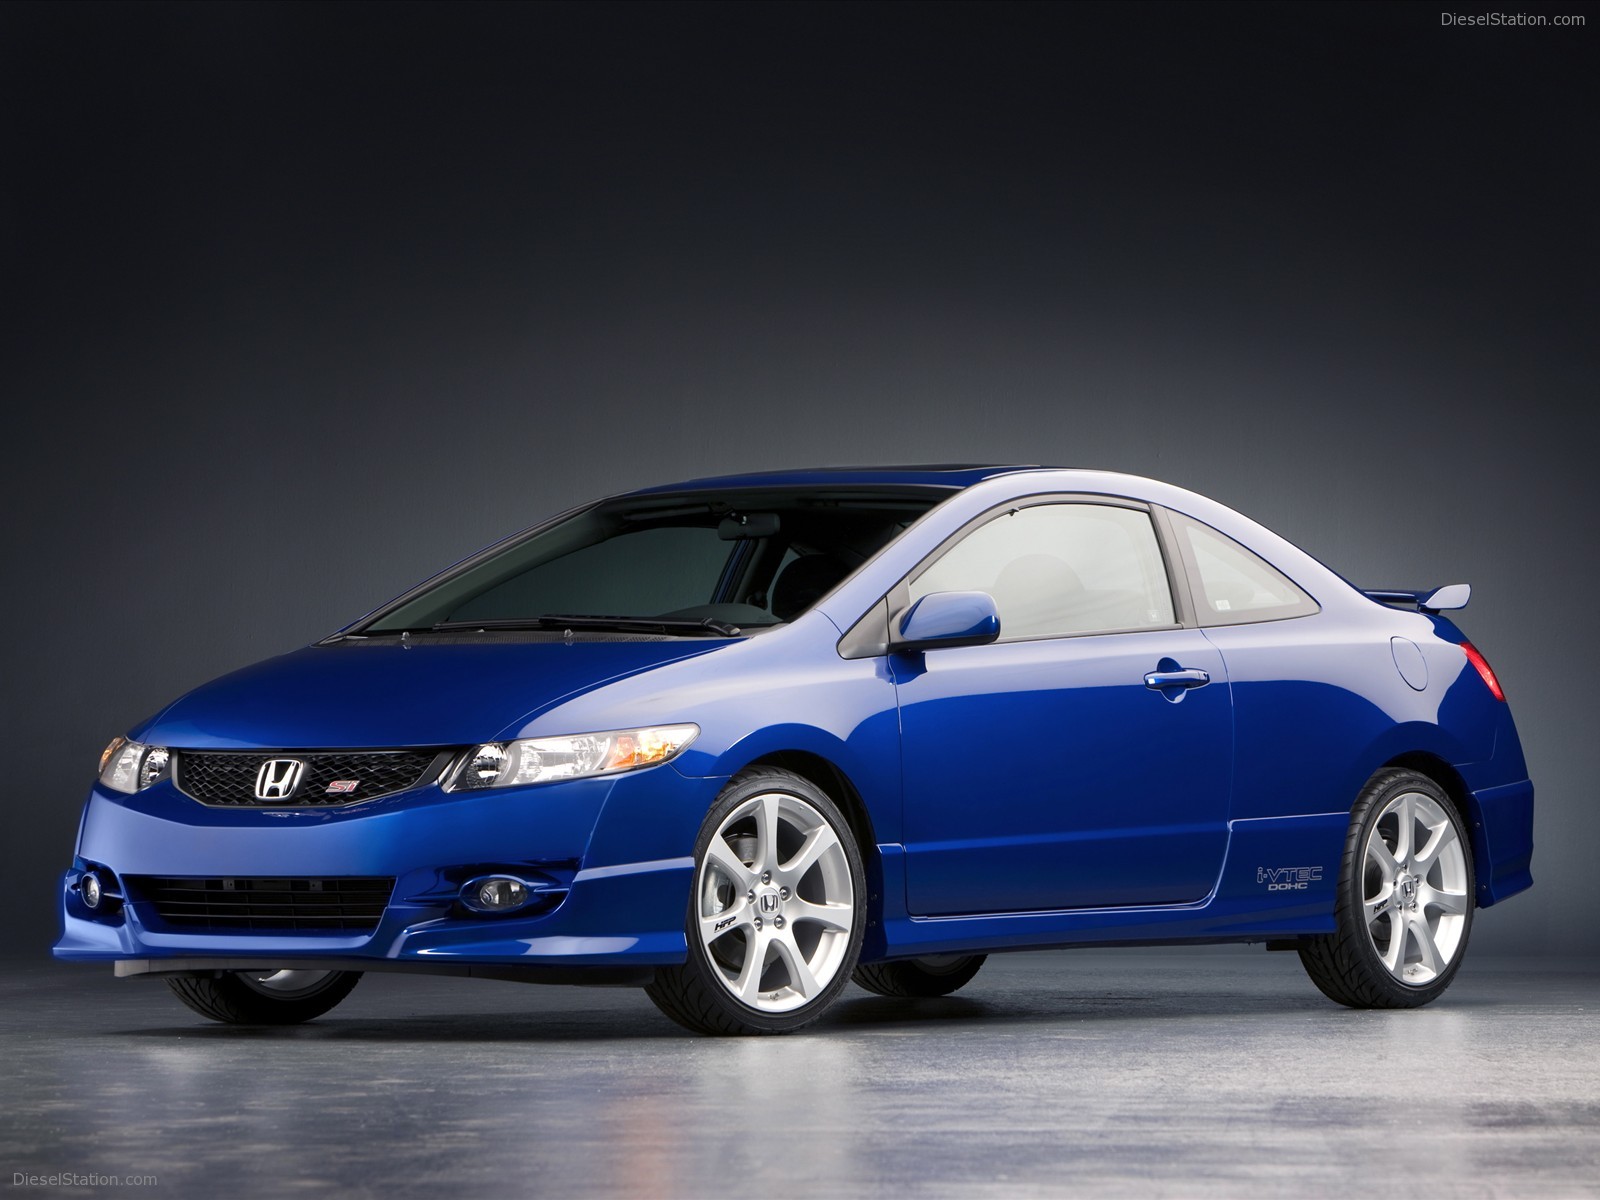 2009 Honda Civic Coupe - Car Picture at Dieselstation